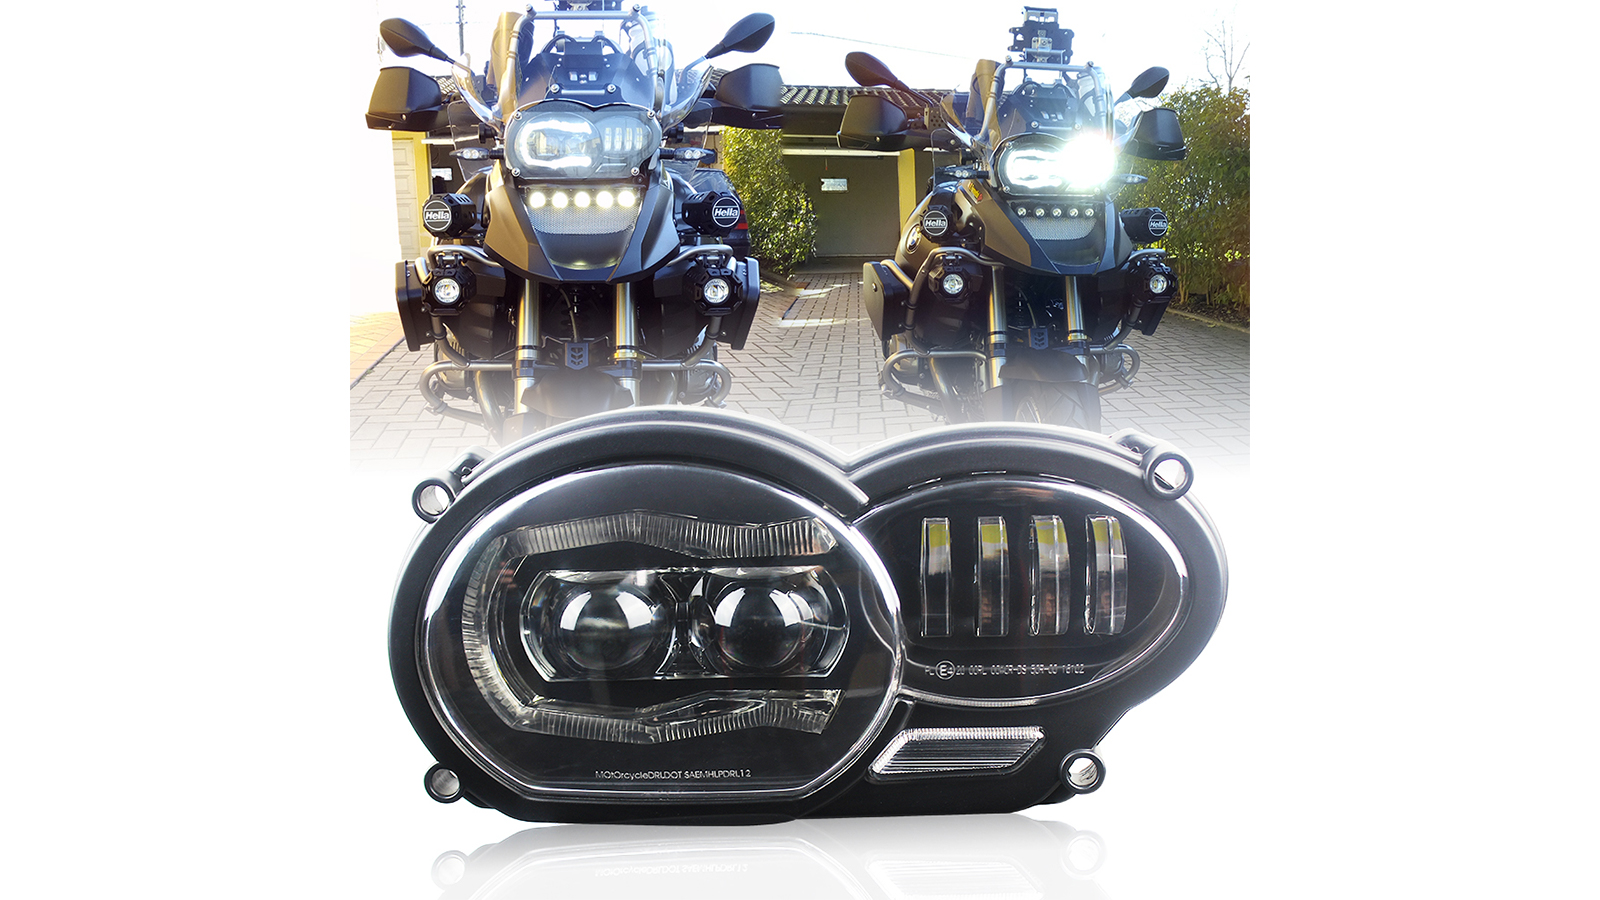 المصباح LED ل BMW R1200GS R 1200 GS ADV R1200GS LC 2004-2012 (Fit Oil Cooler)